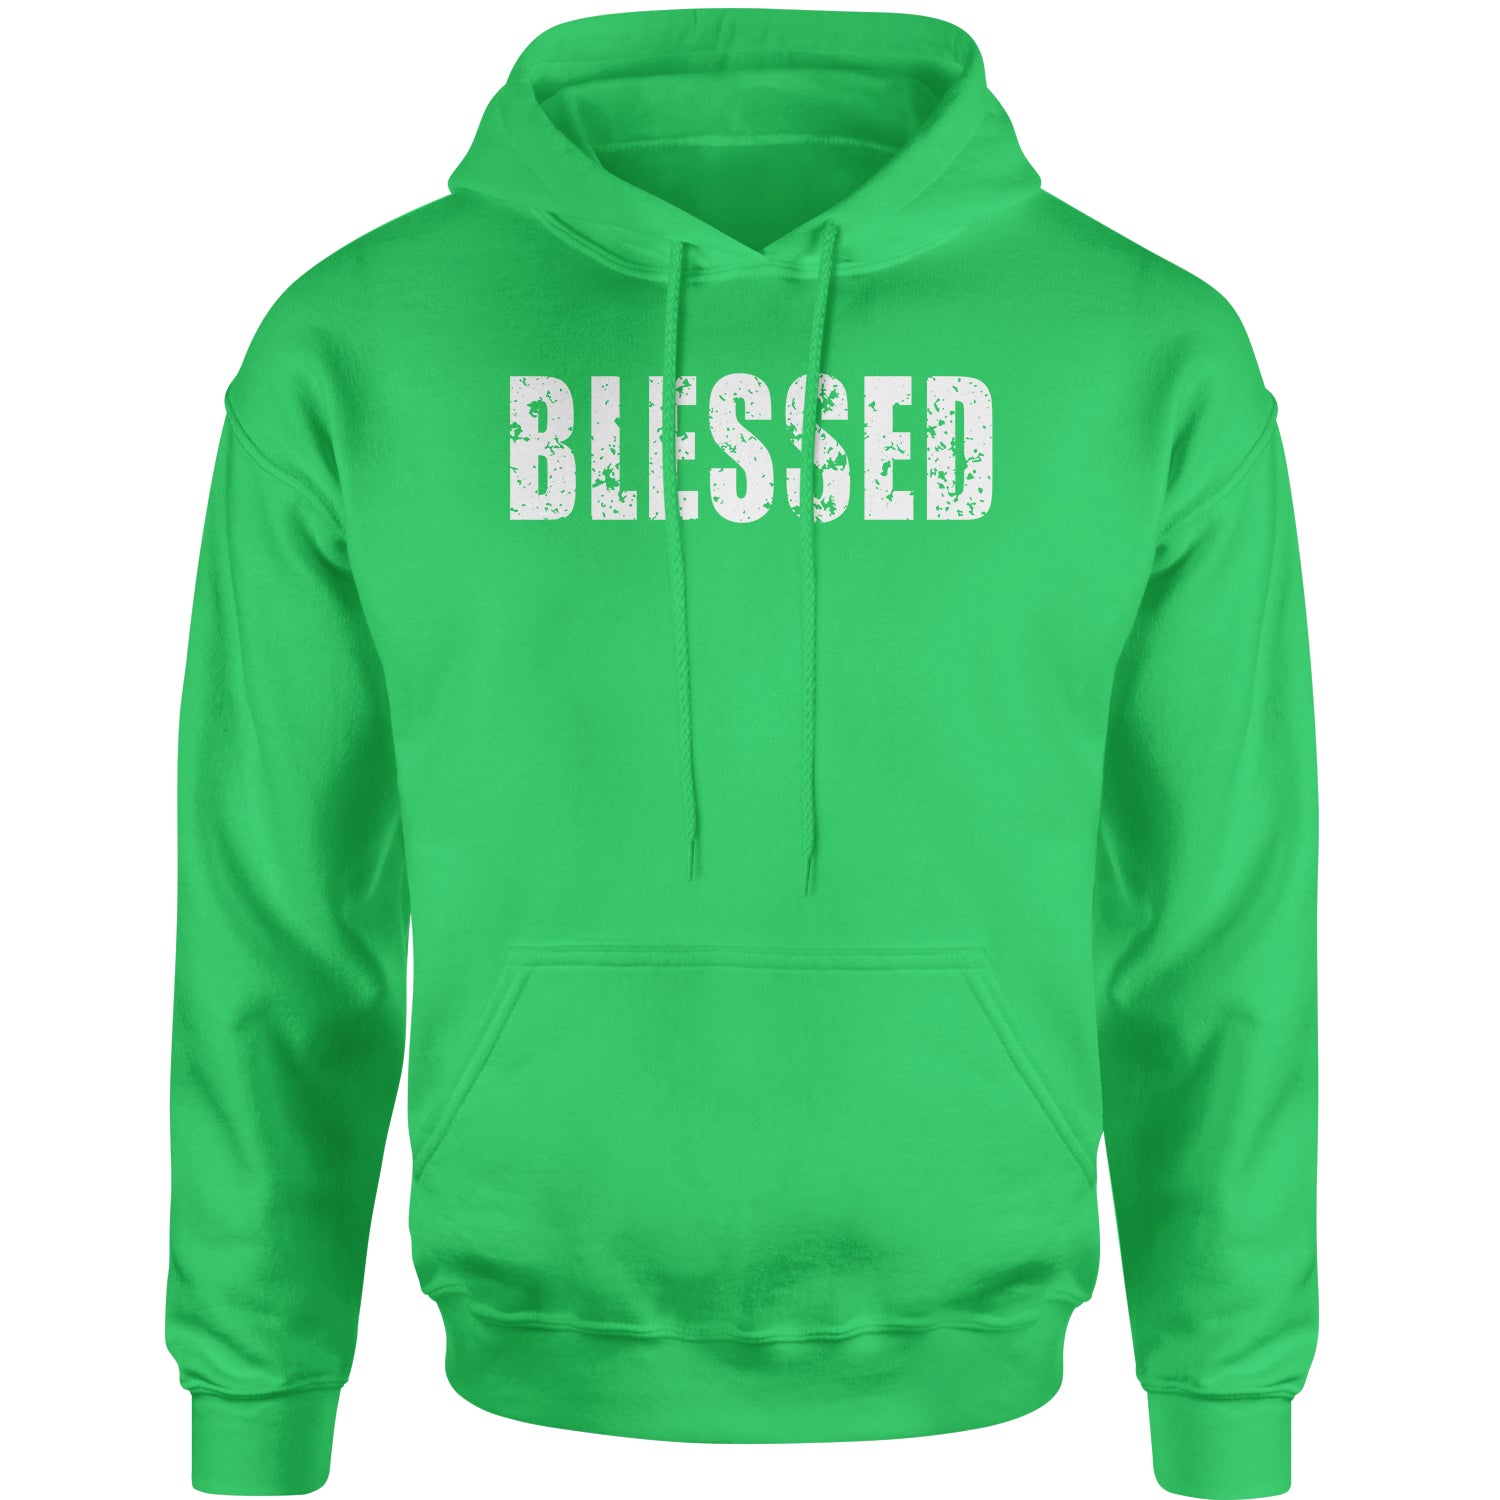 Blessed Religious Grateful Thankful Adult Hoodie Sweatshirt #expressiontees by Expression Tees